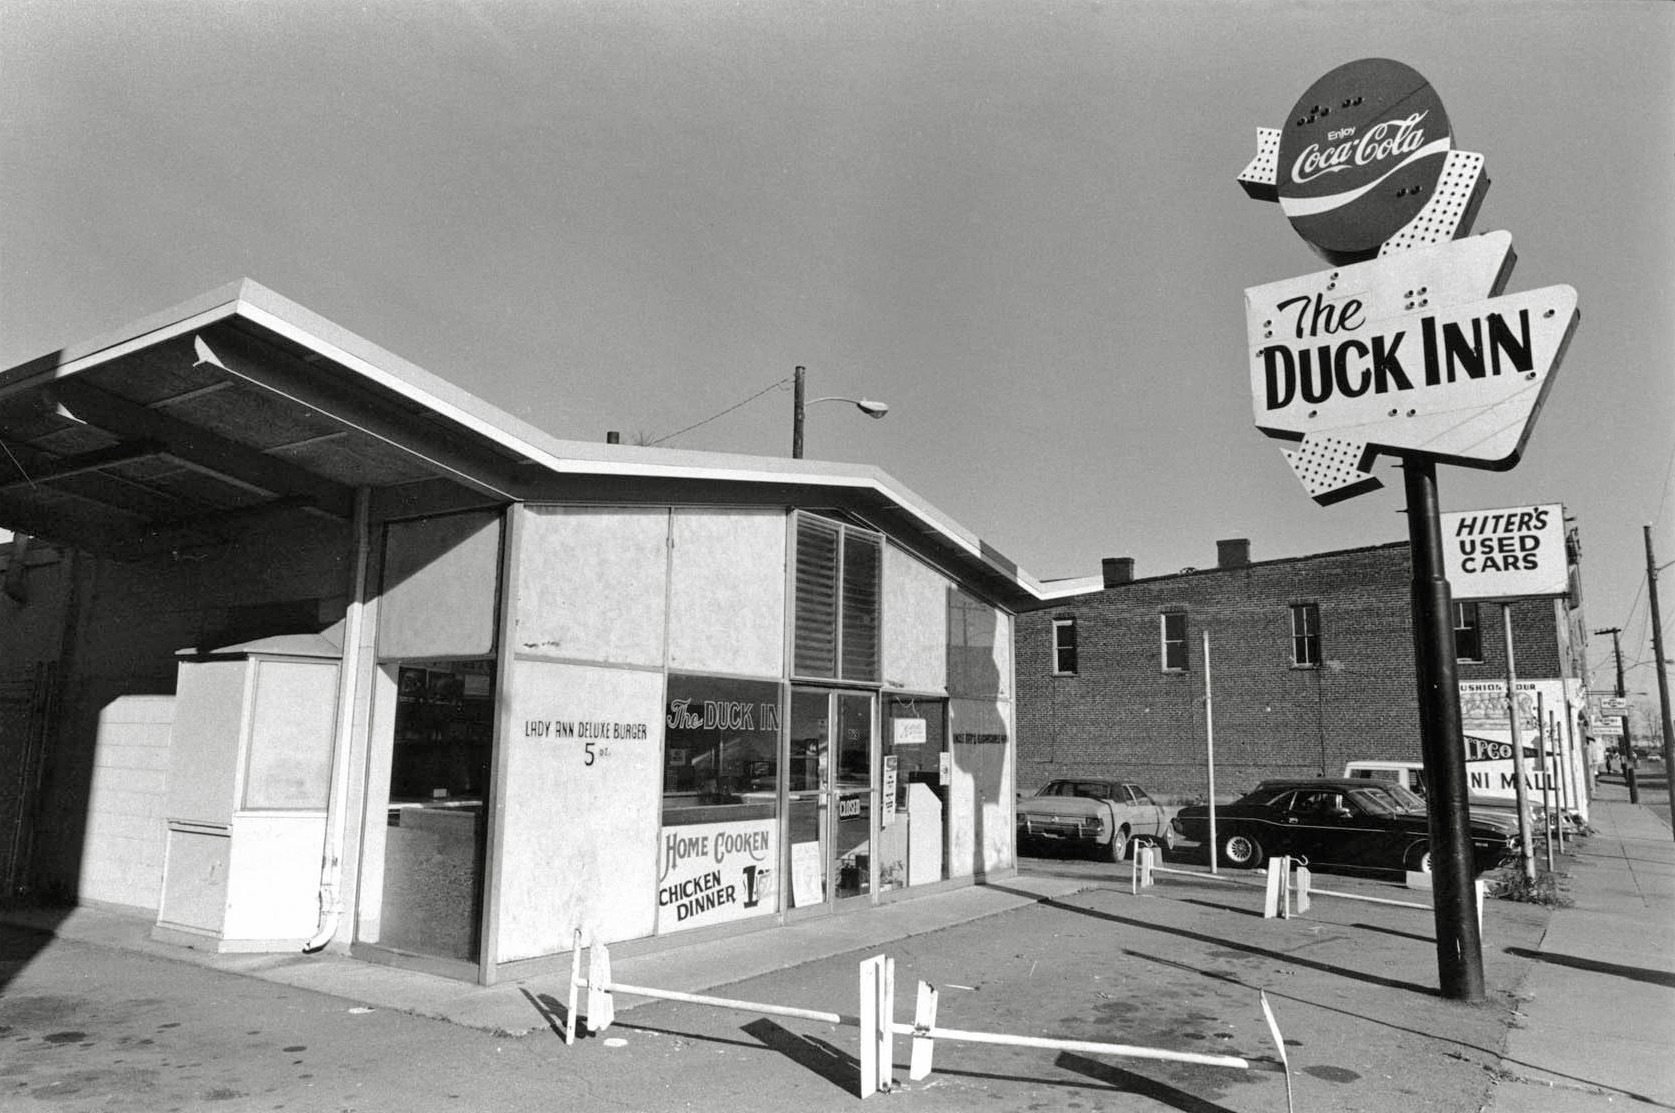 The Duck Inn, Charlottesville, Virginia. From a series of pictures I took when I was a first year student at U-Va. in 1979. On Main Street, across the street from the Amtrak station. There's just nothing like a "Home Cooken Chicken Dinner" from the Duck Inn! View full size.